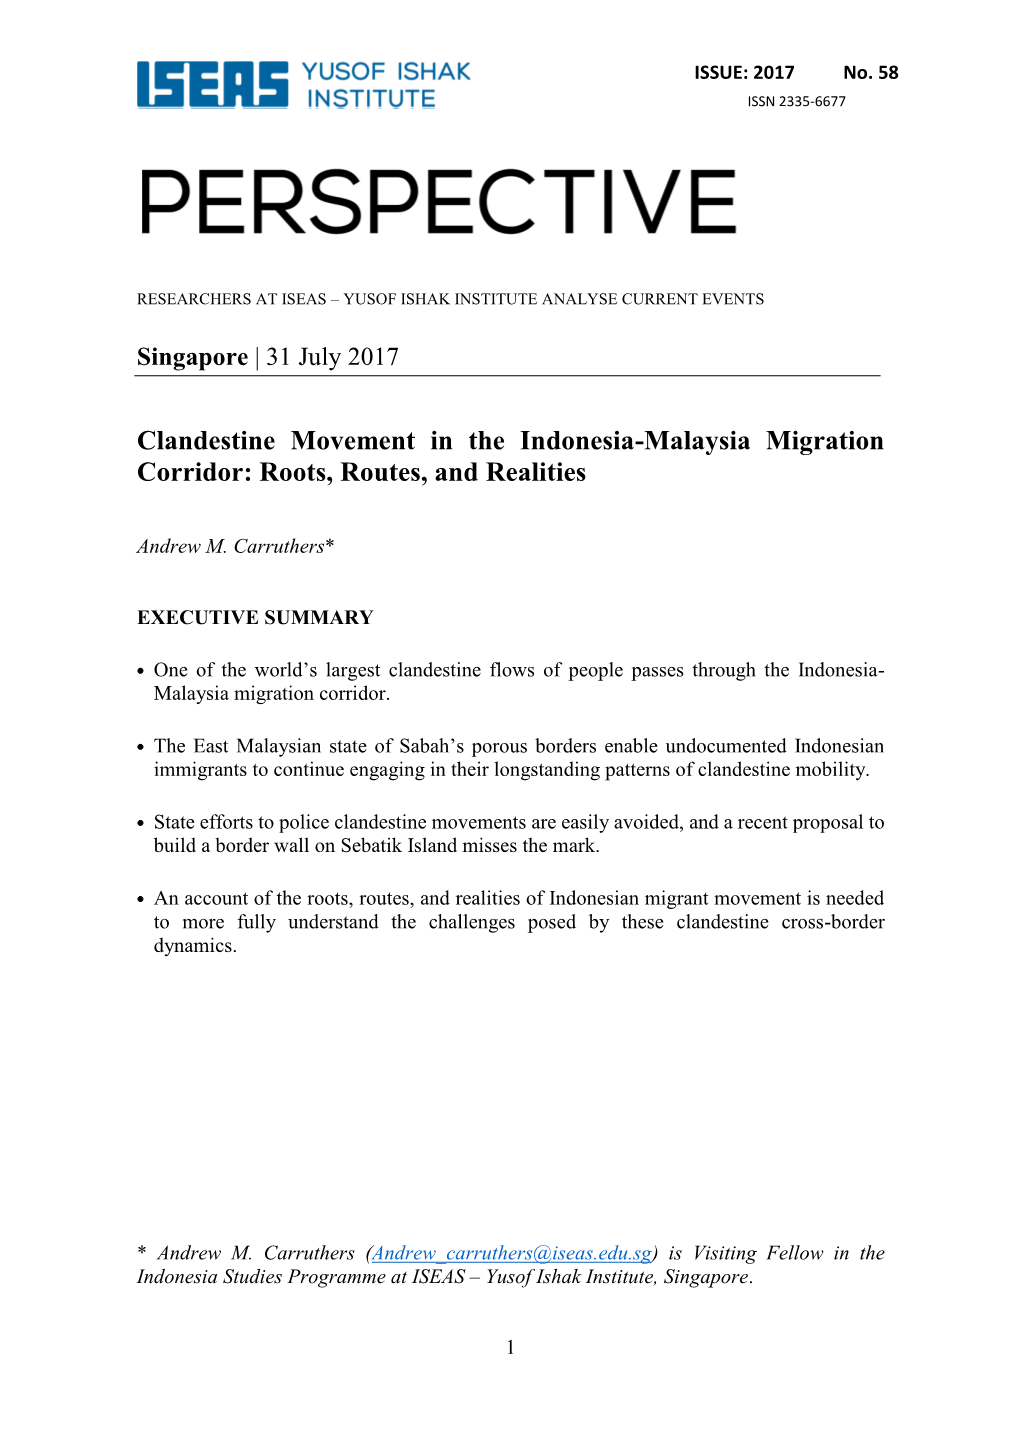 Clandestine Movement in the Indonesia-Malaysia Migration Corridor: Roots, Routes, and Realities